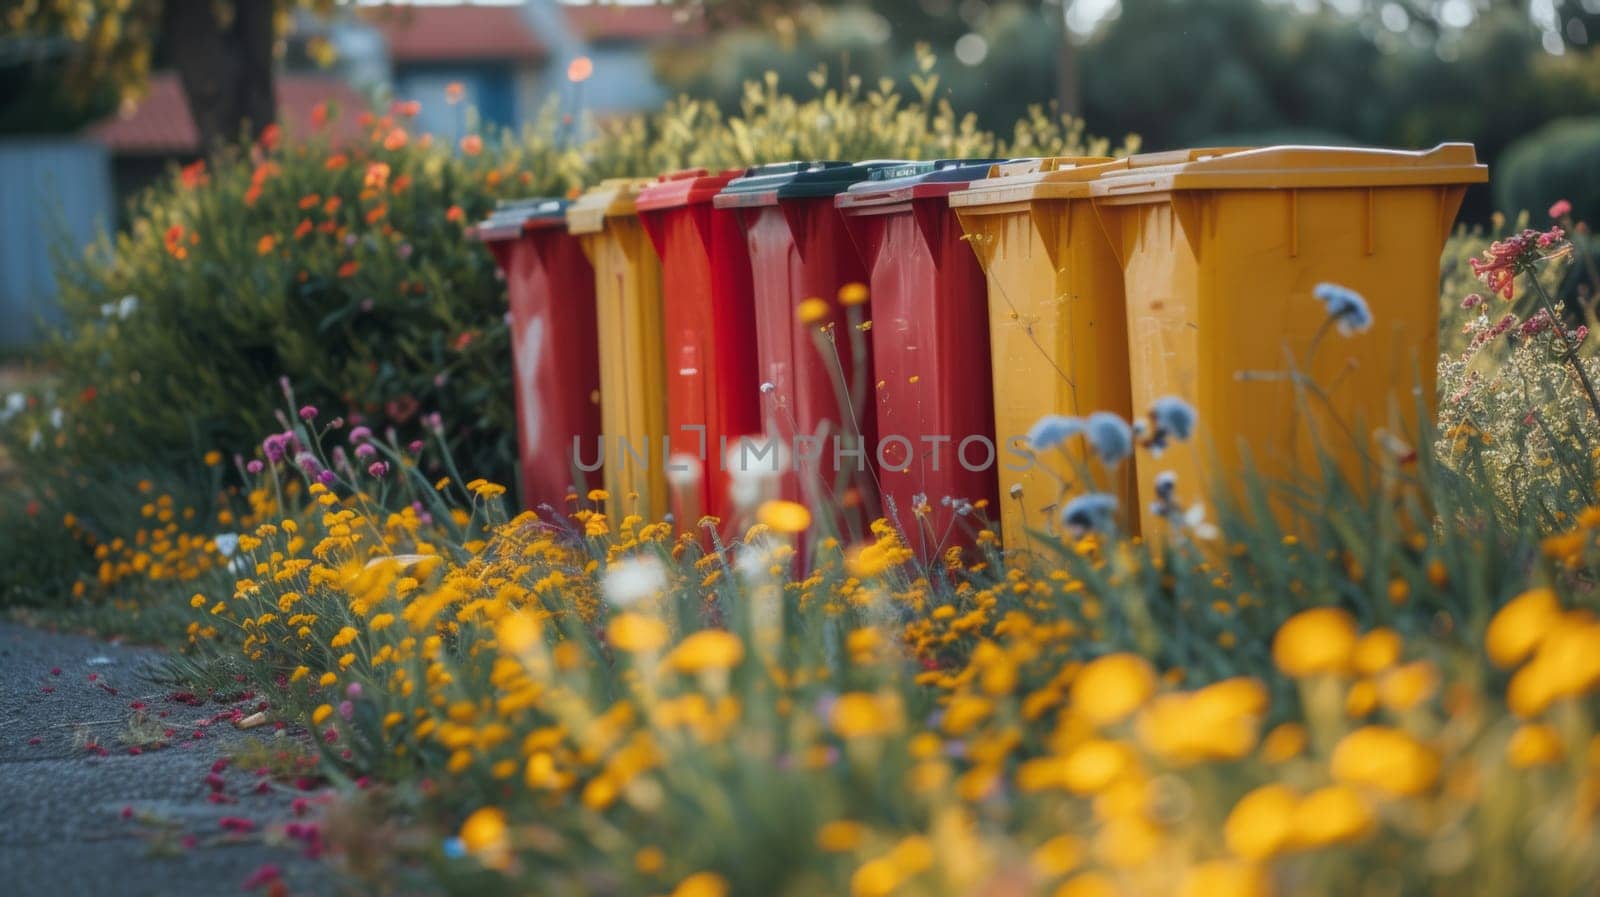 A row of colorful trash cans sitting in a field next to flowers, AI by starush